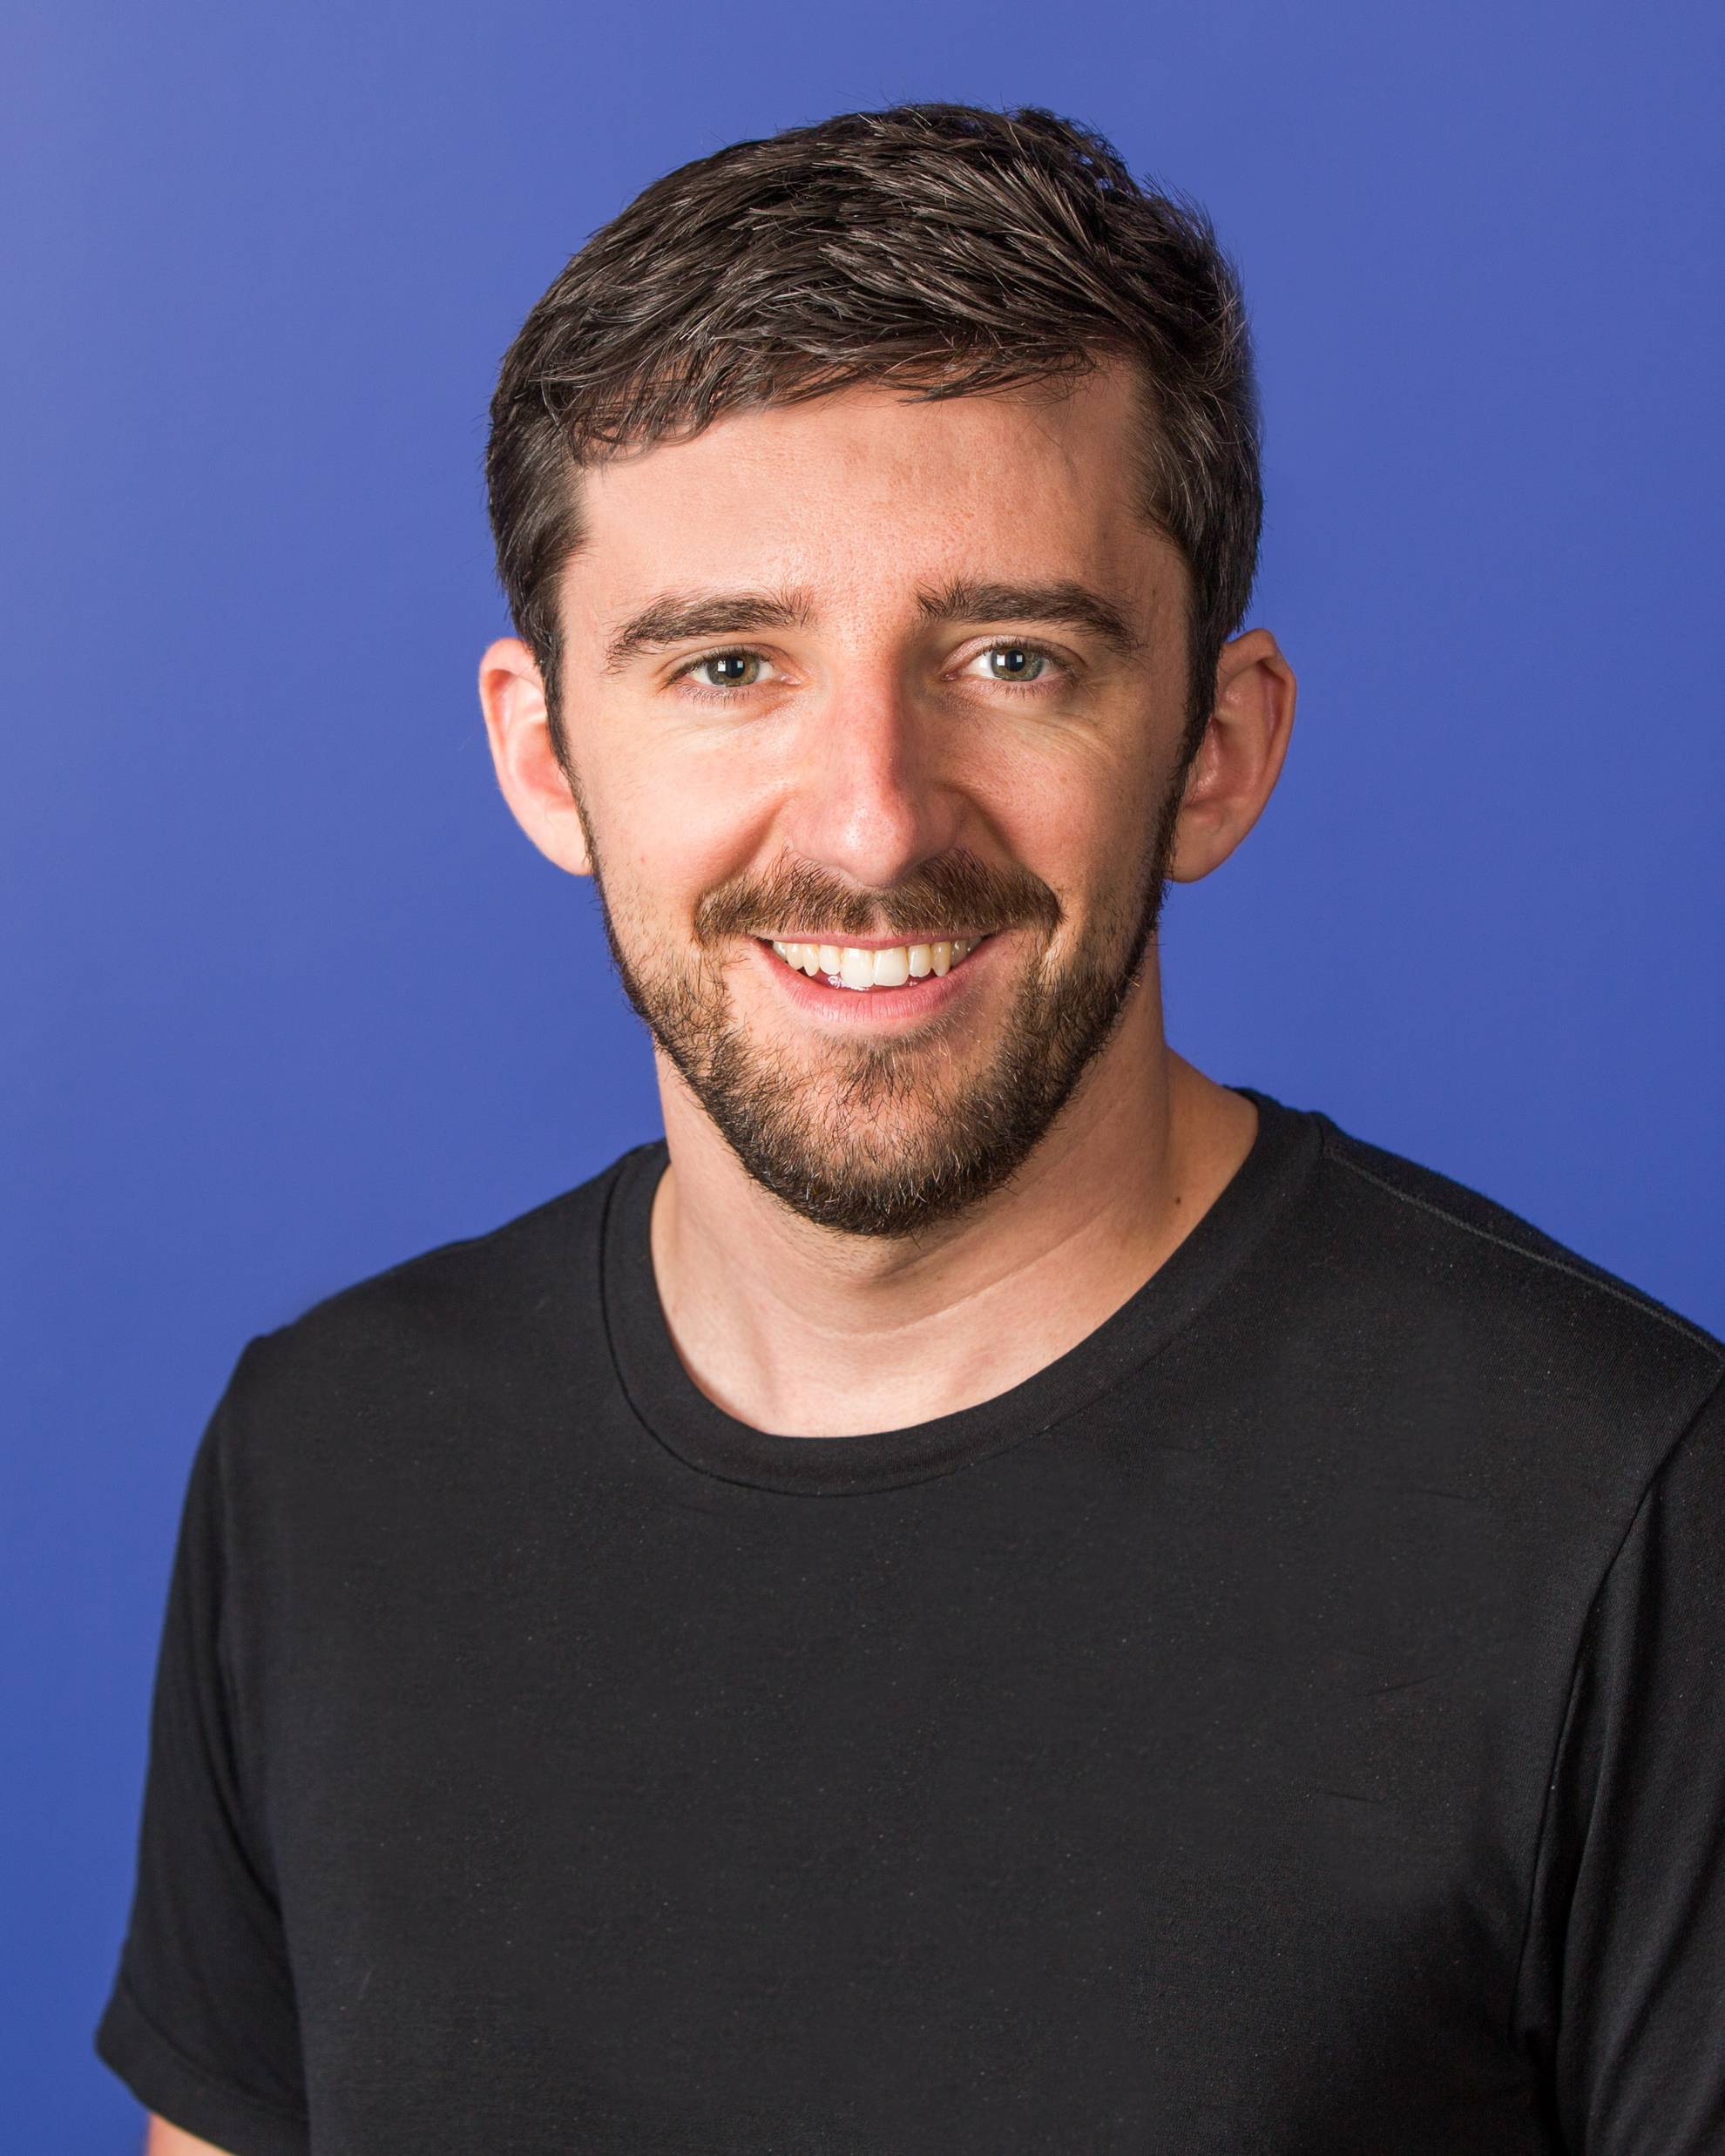 Andrew Sutherland, Founder of Quizlet